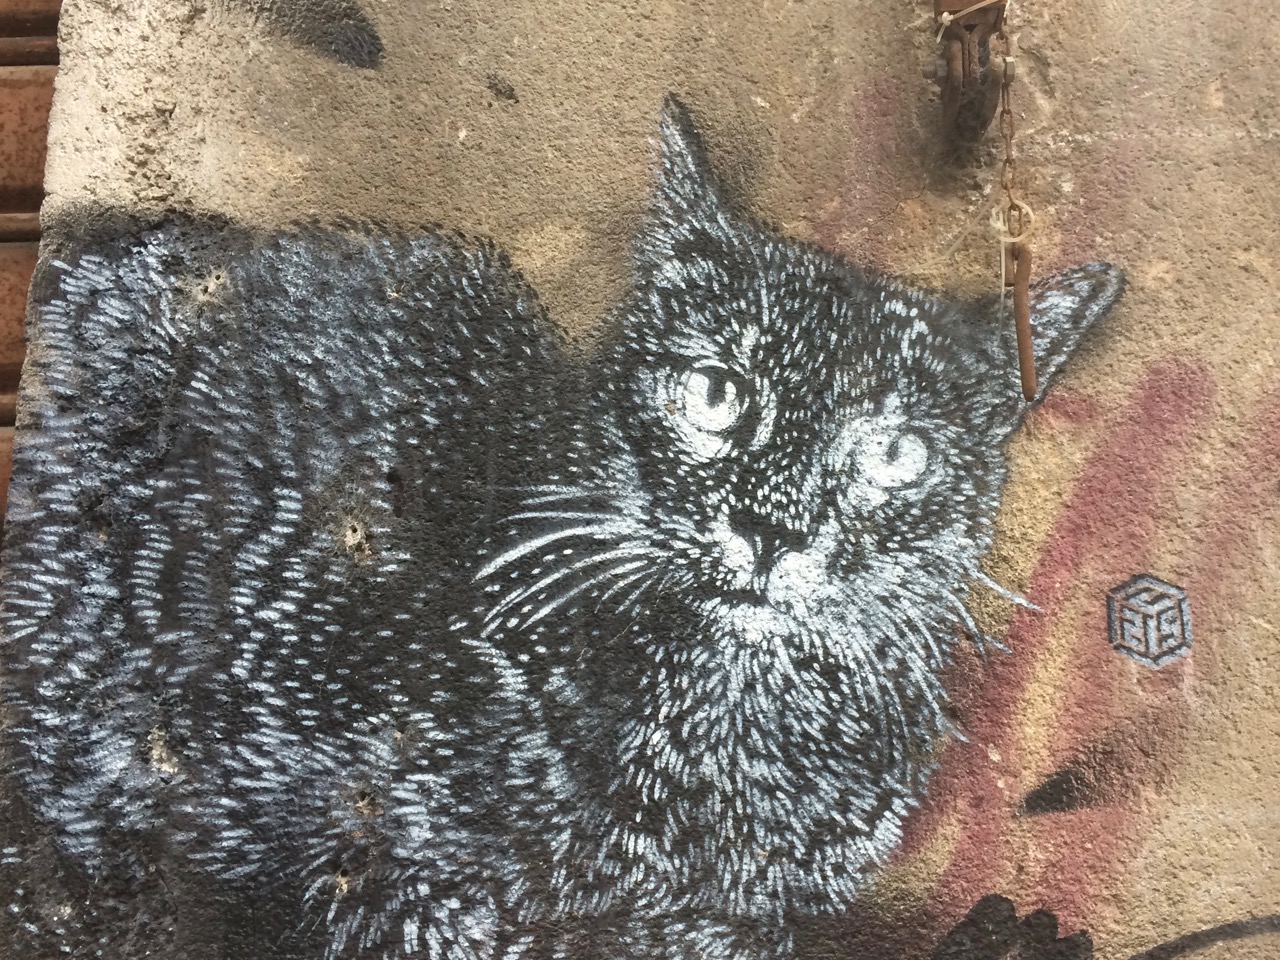 The Cat by C215